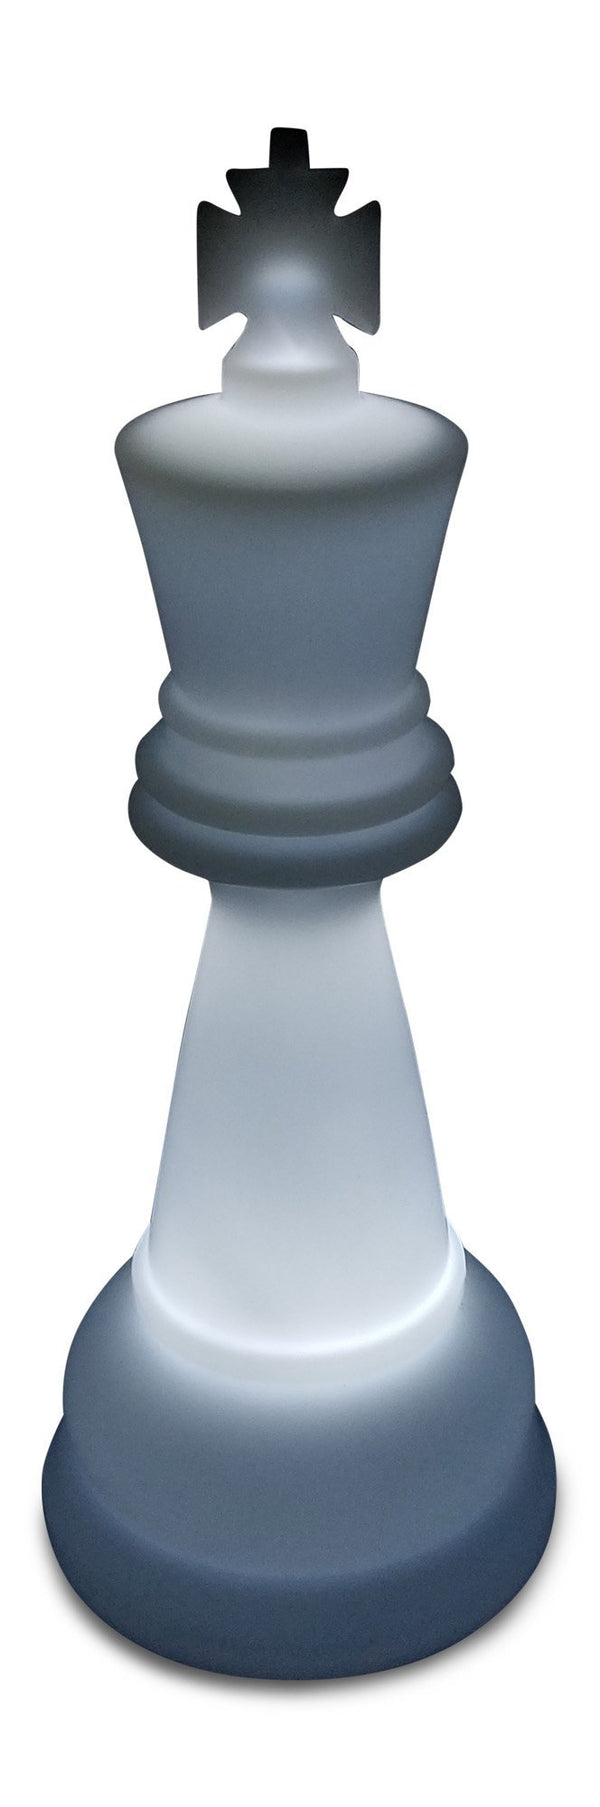 MegaChess 38 Inch Perfect King Light-Up Giant Chess Piece - White | Default Title | MegaChess.com